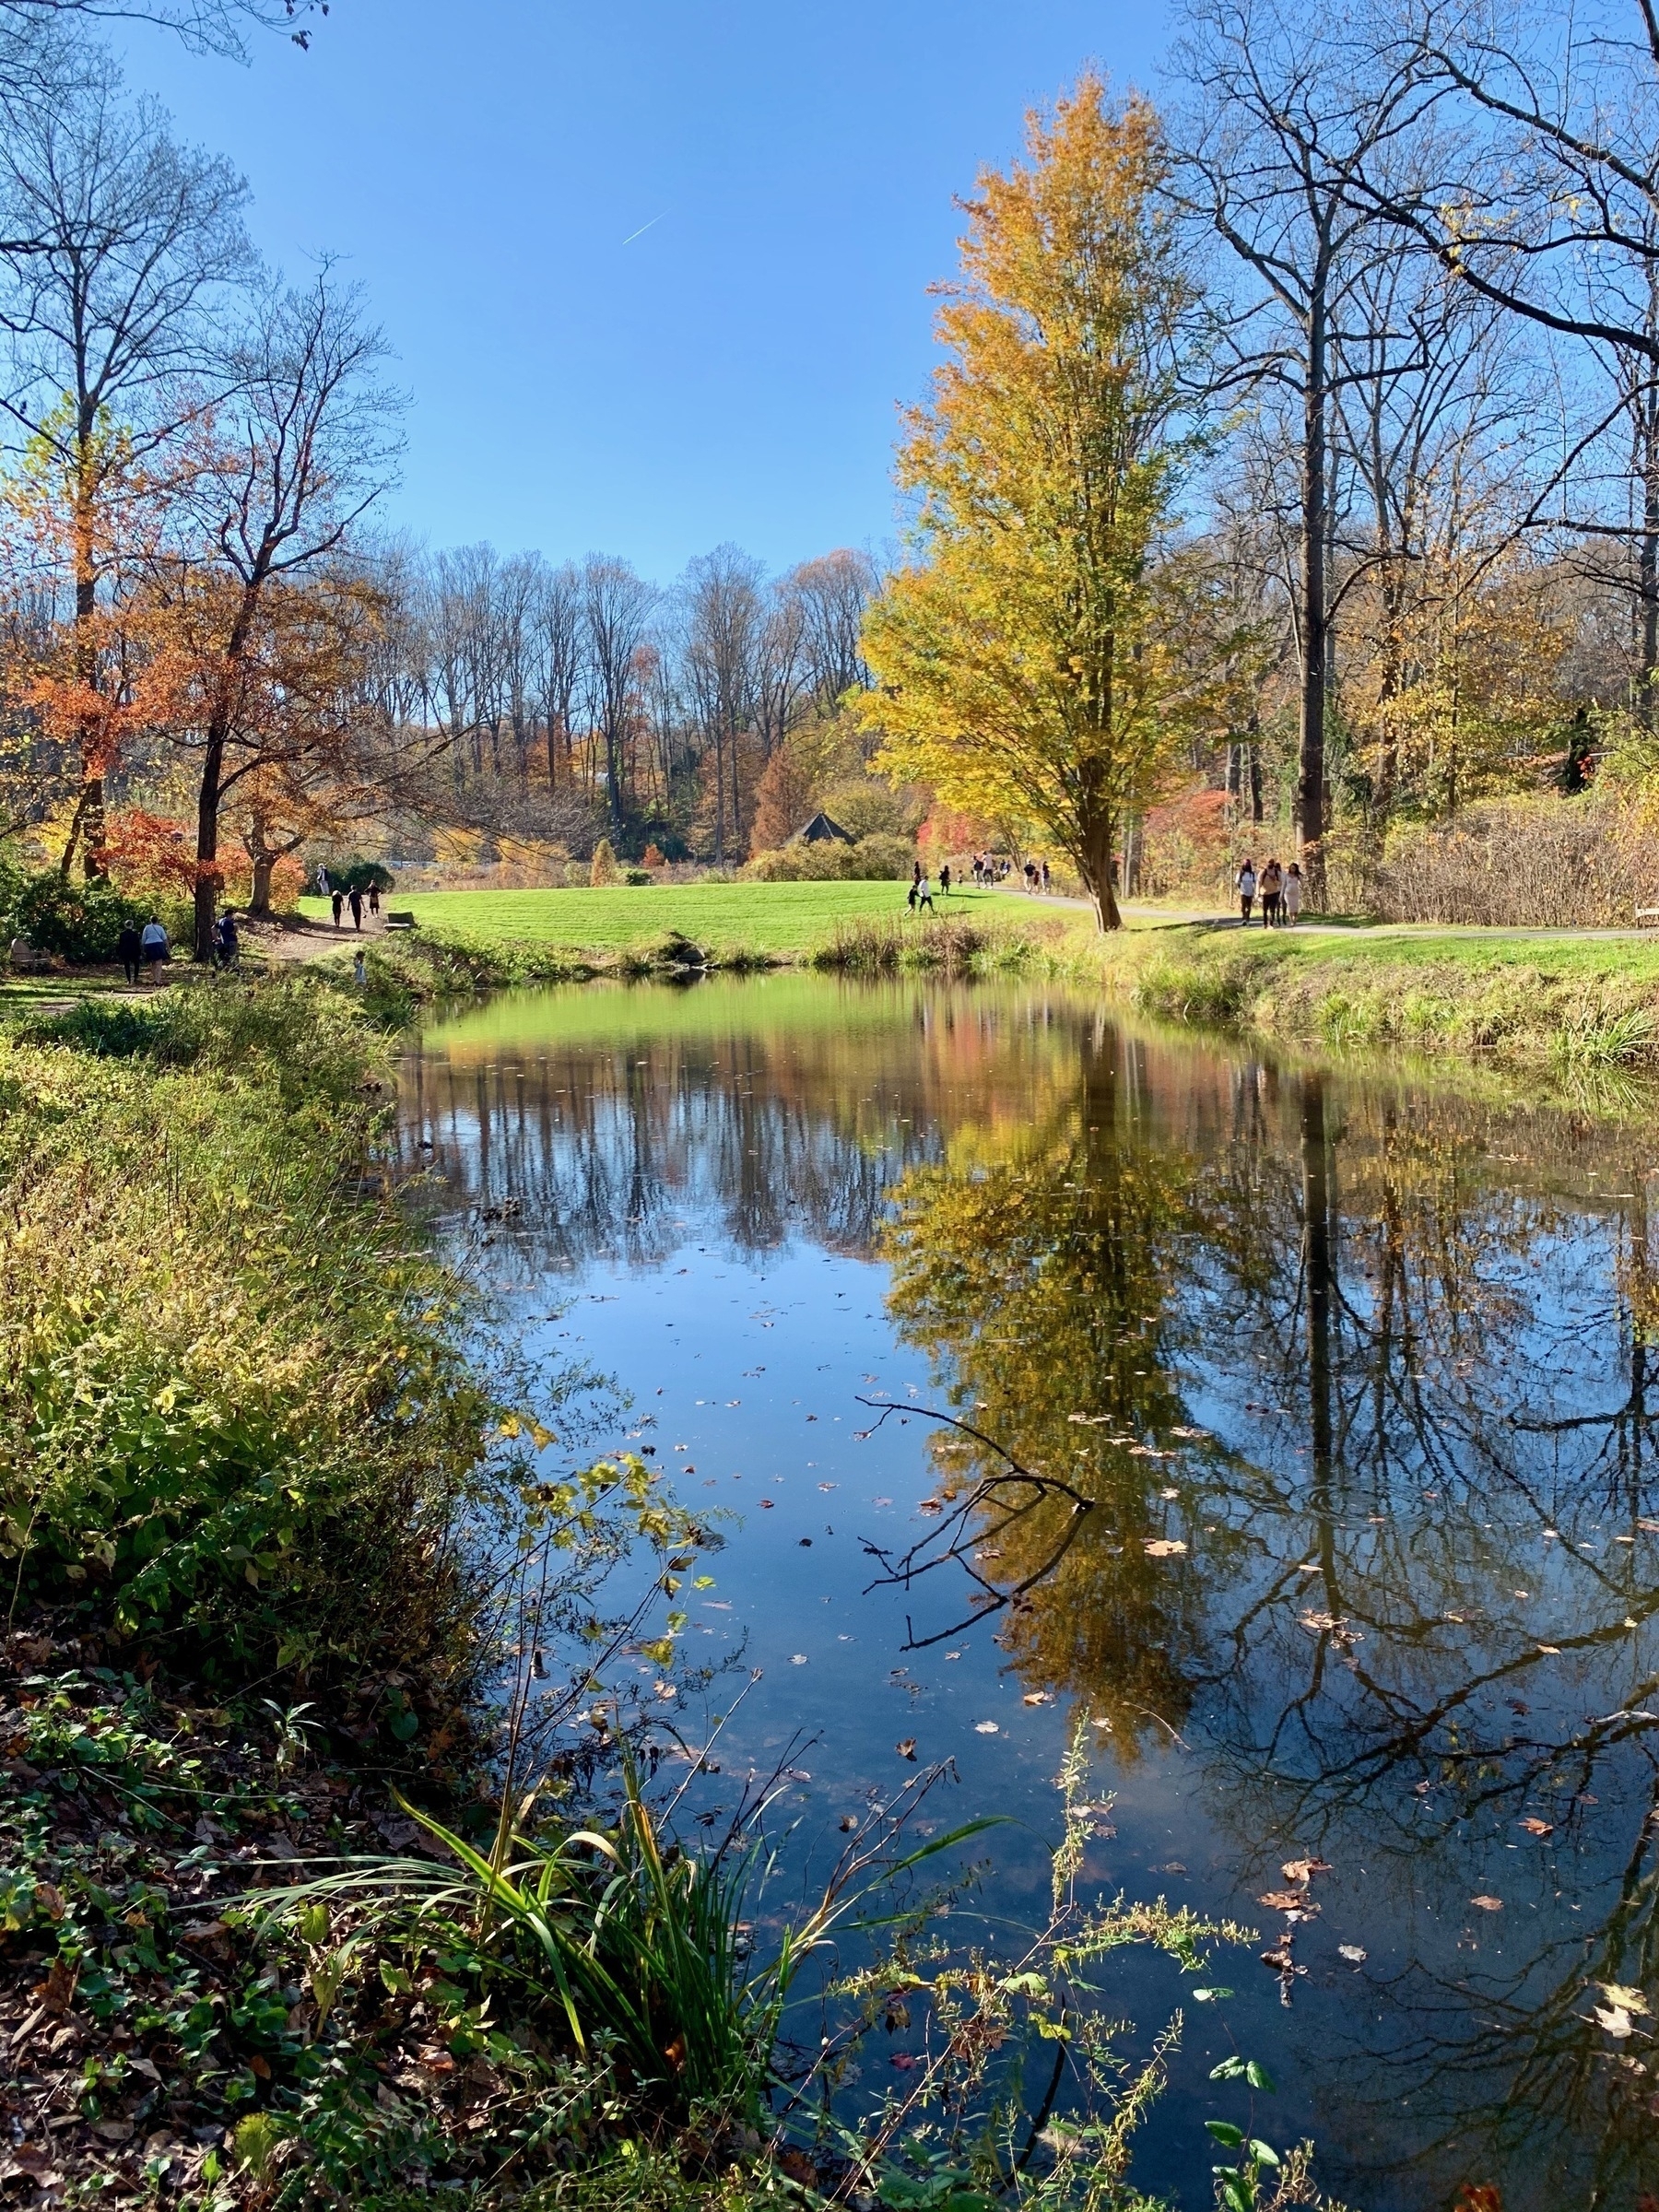 A still pond mirrors an early fall landscape under a clear blue sky.